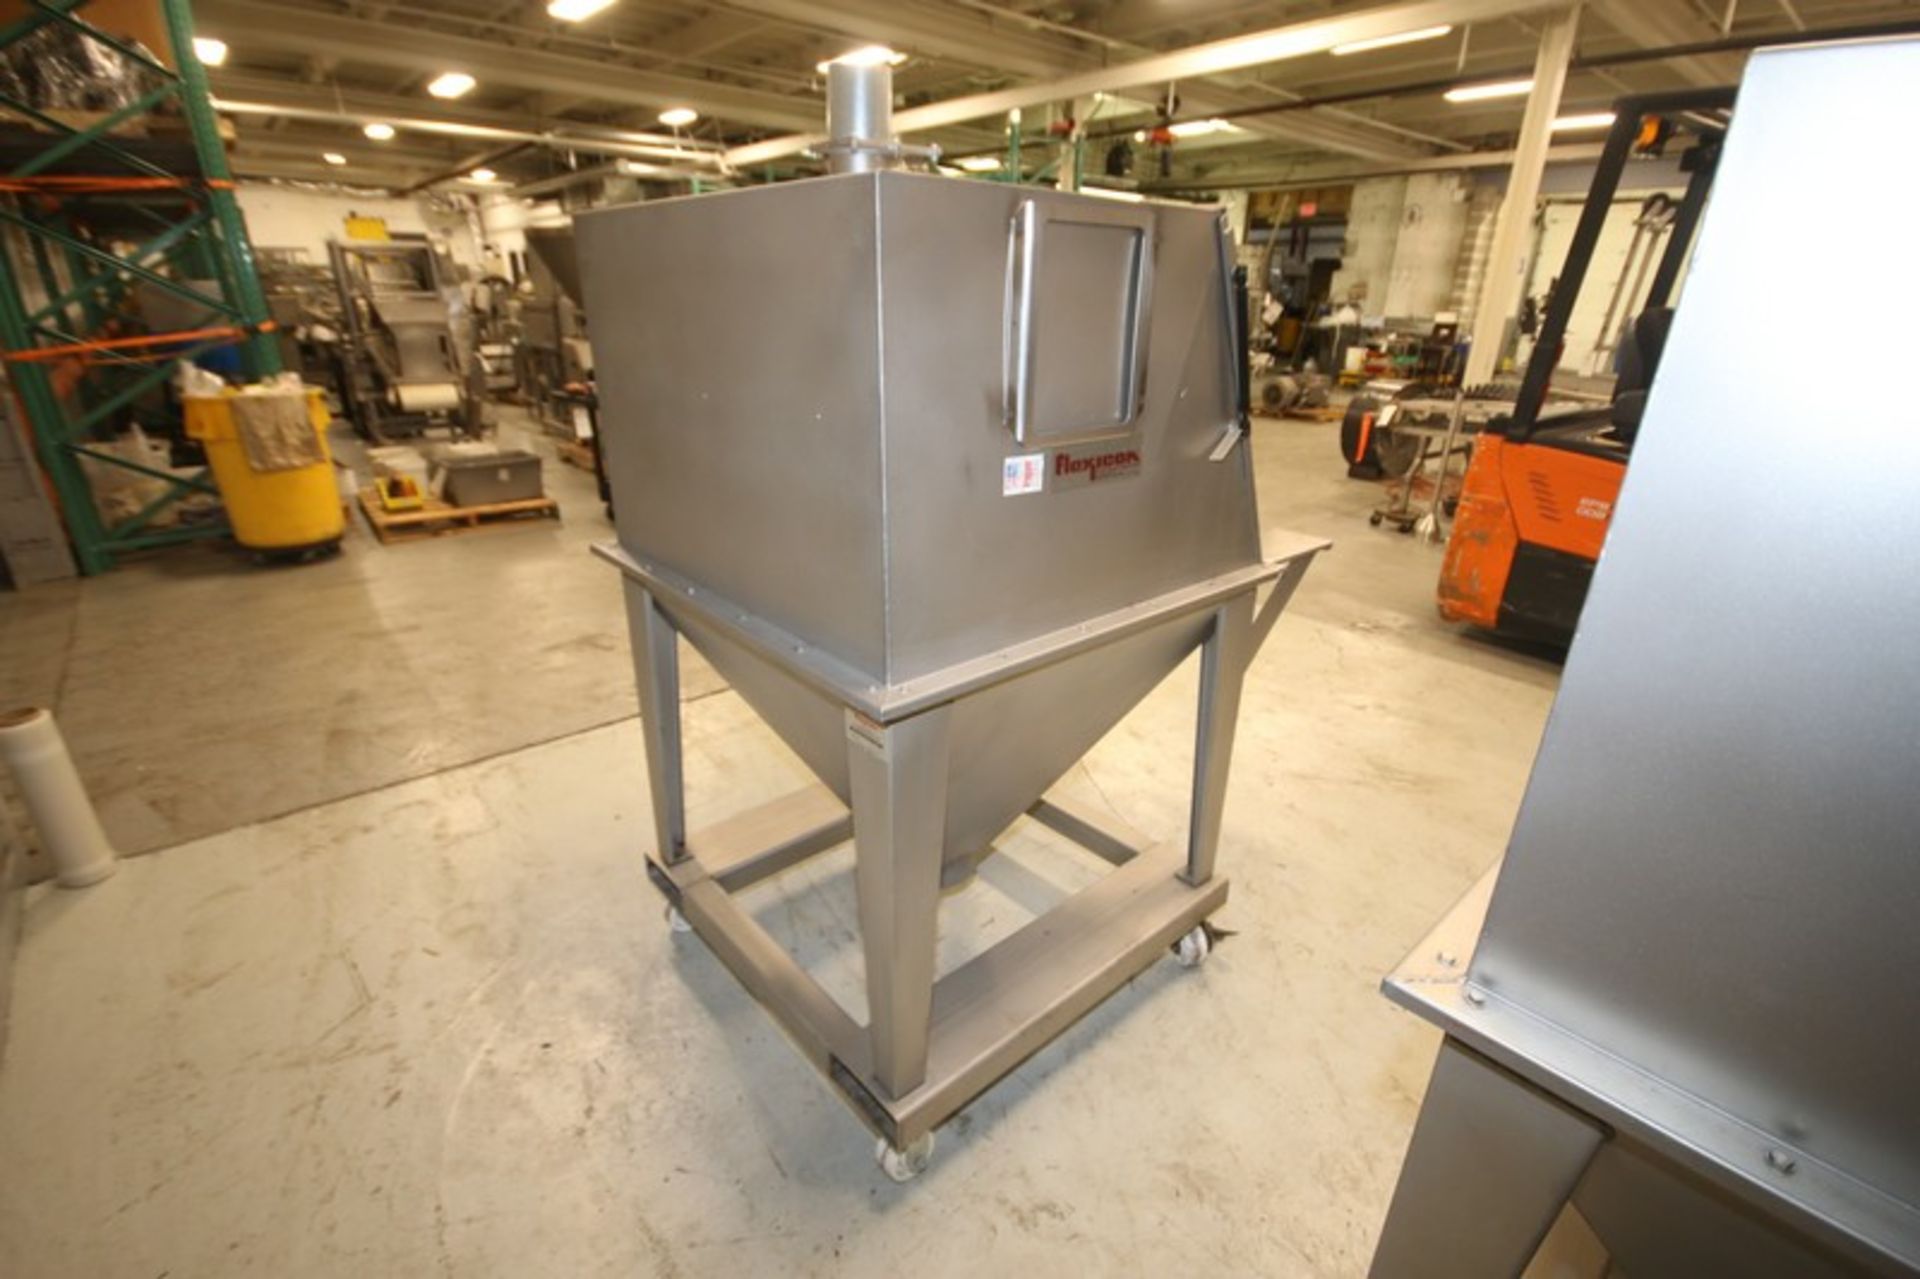 Flexicon S/S Portable Powder Dump Hopper, SN 46023, with 36" W x 36" L Interior with Hinged Lid, S/S - Image 5 of 6